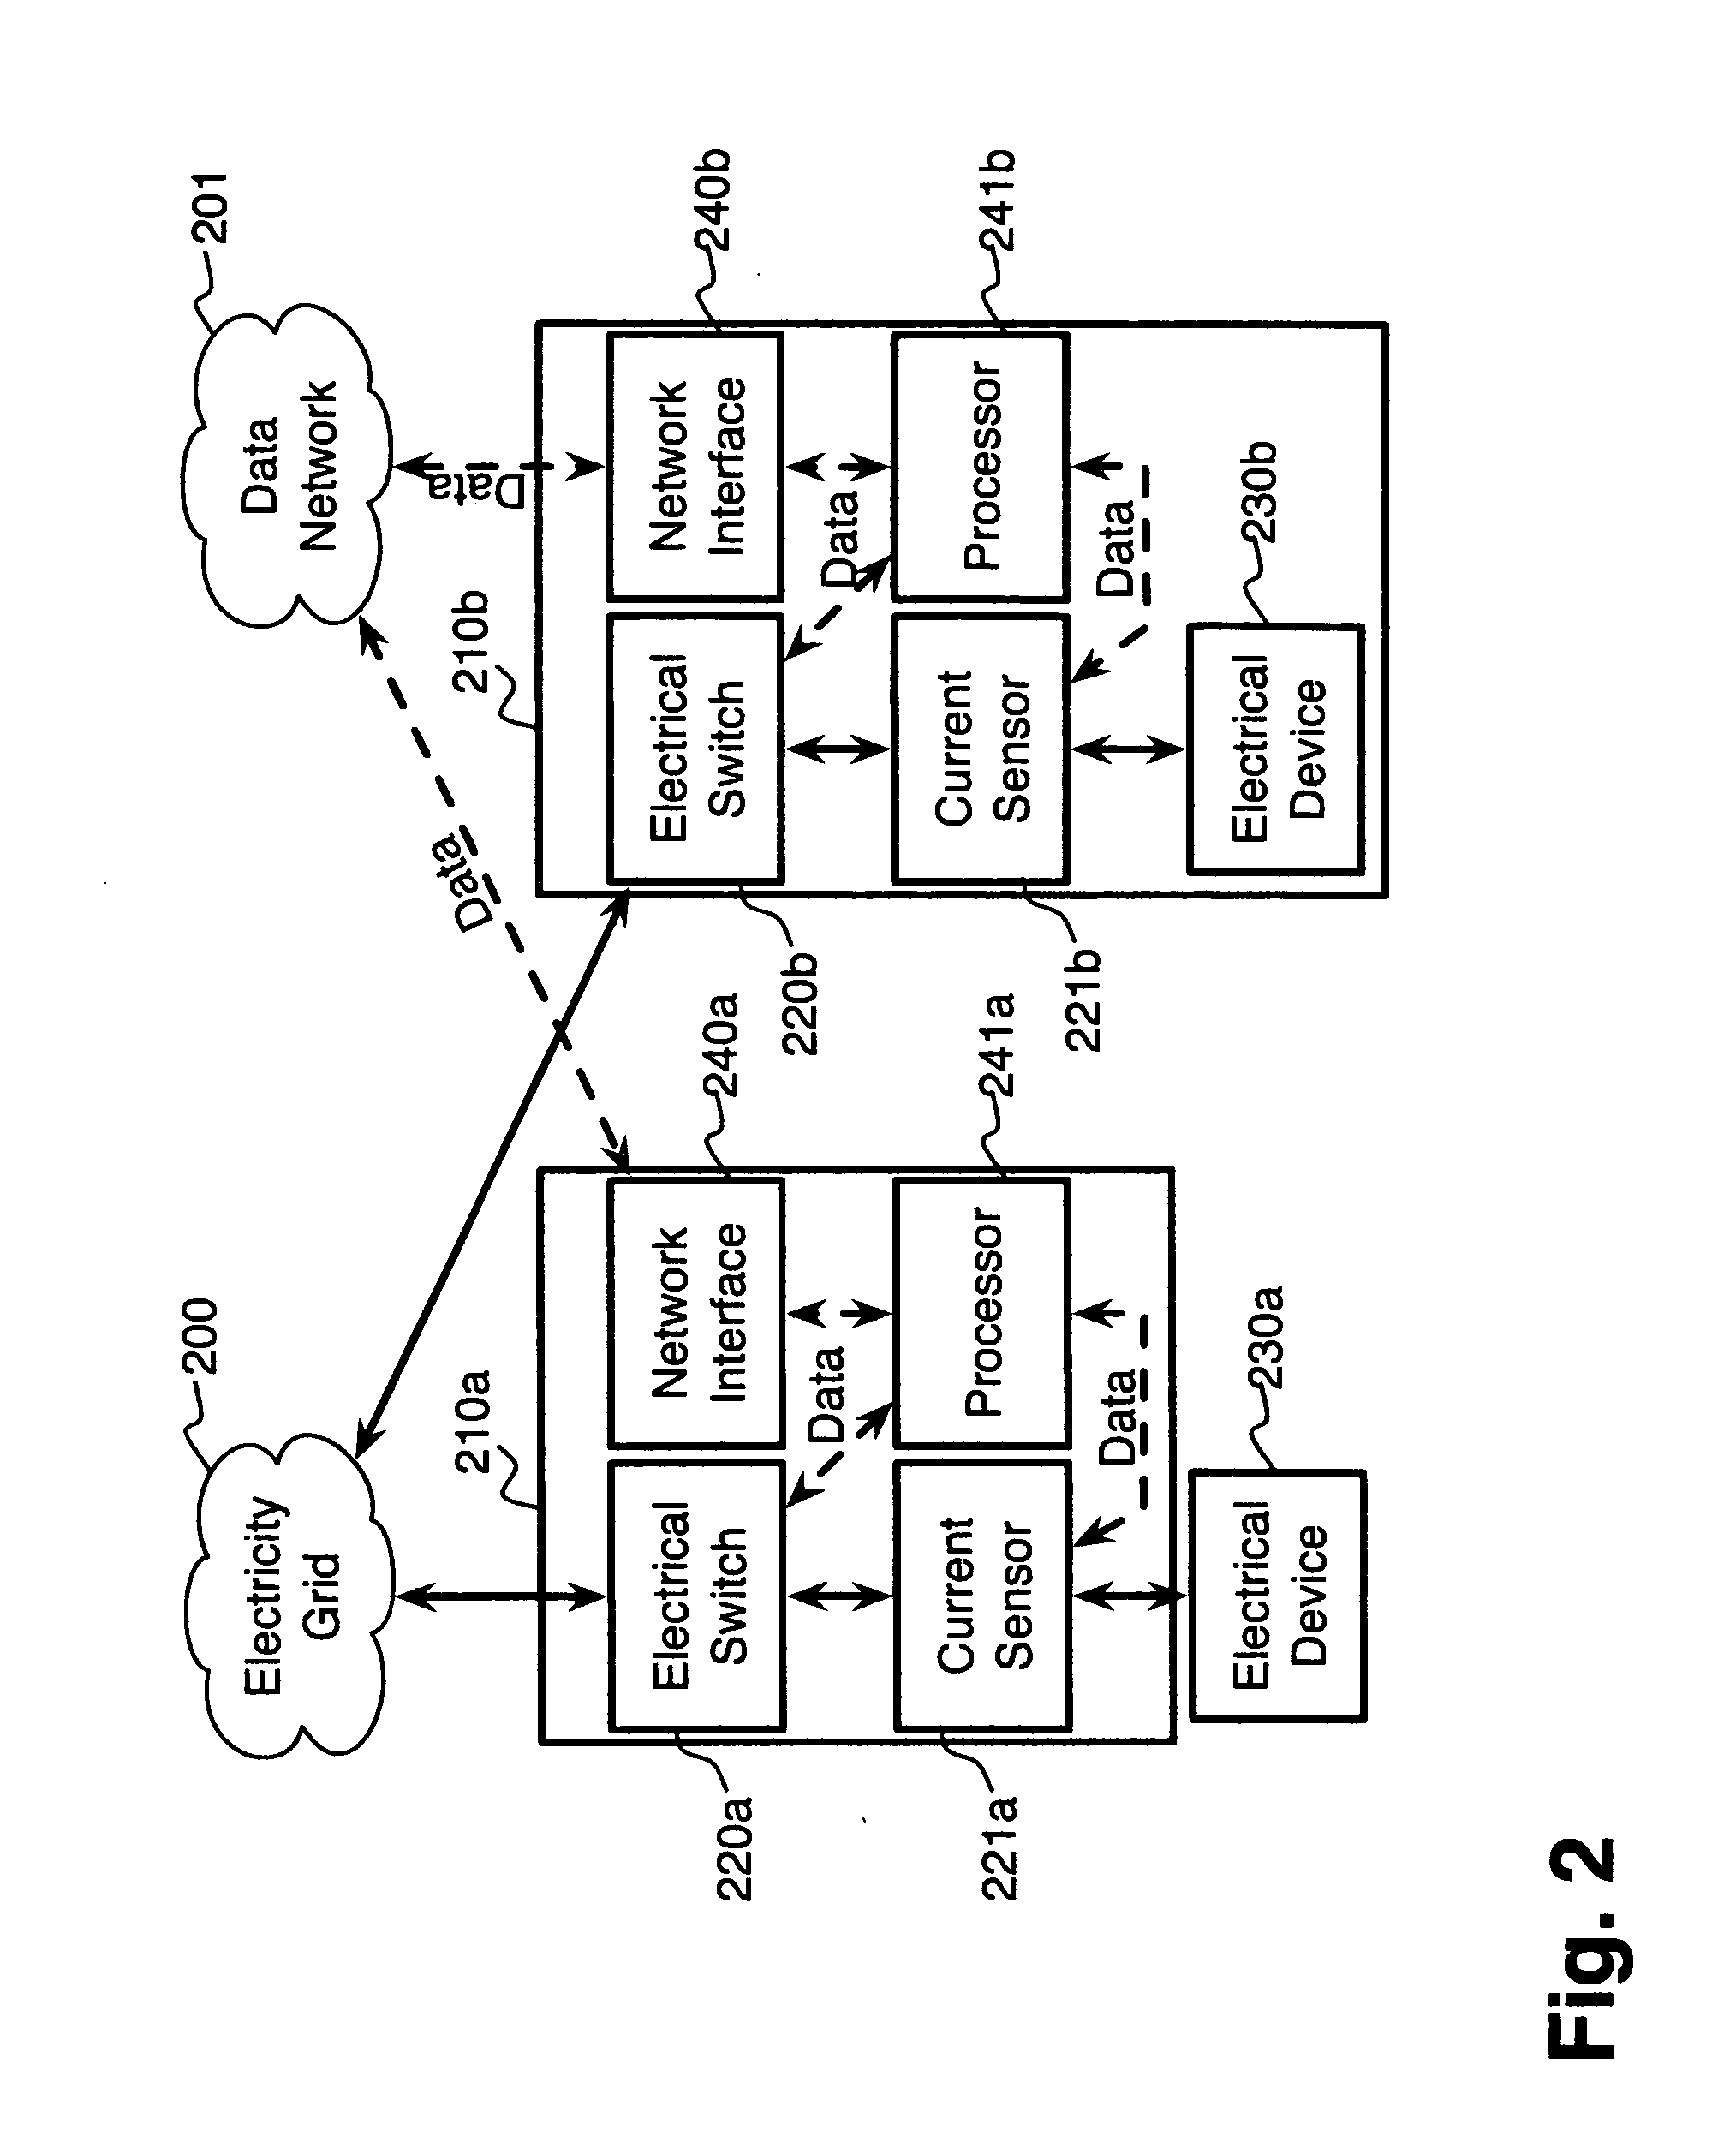 System and method for fractional smart metering